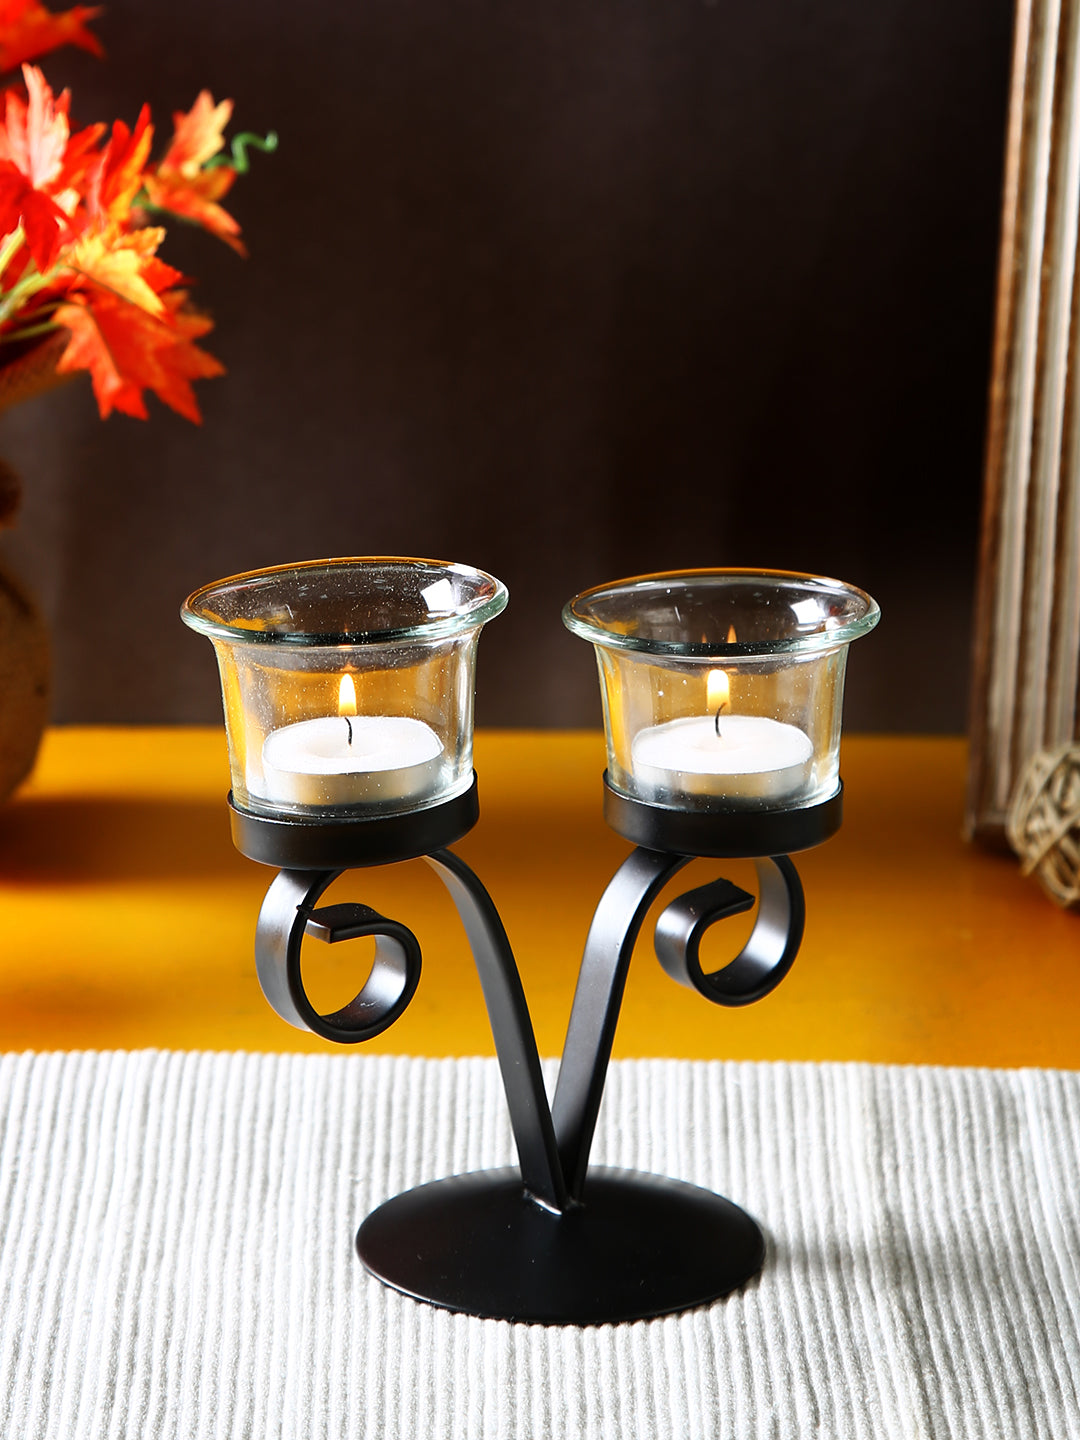 Hosley V shape Decorative Tealight Holder with 2 Clear Glasses